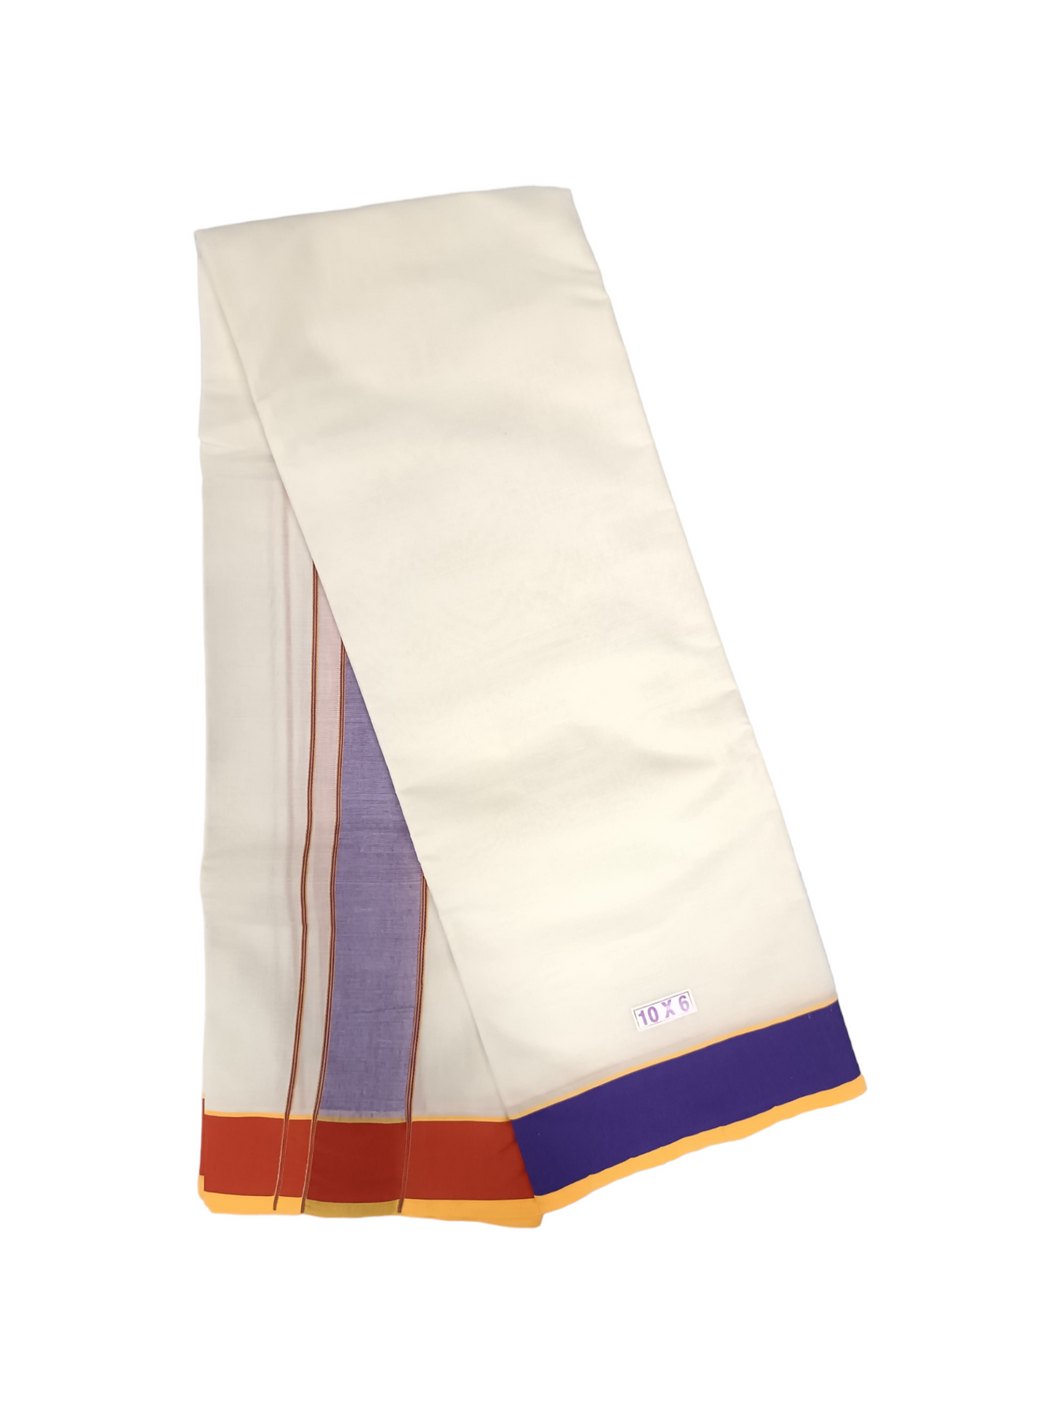 Exclusive Dhoties Half white pure cotton Dhoti with 2